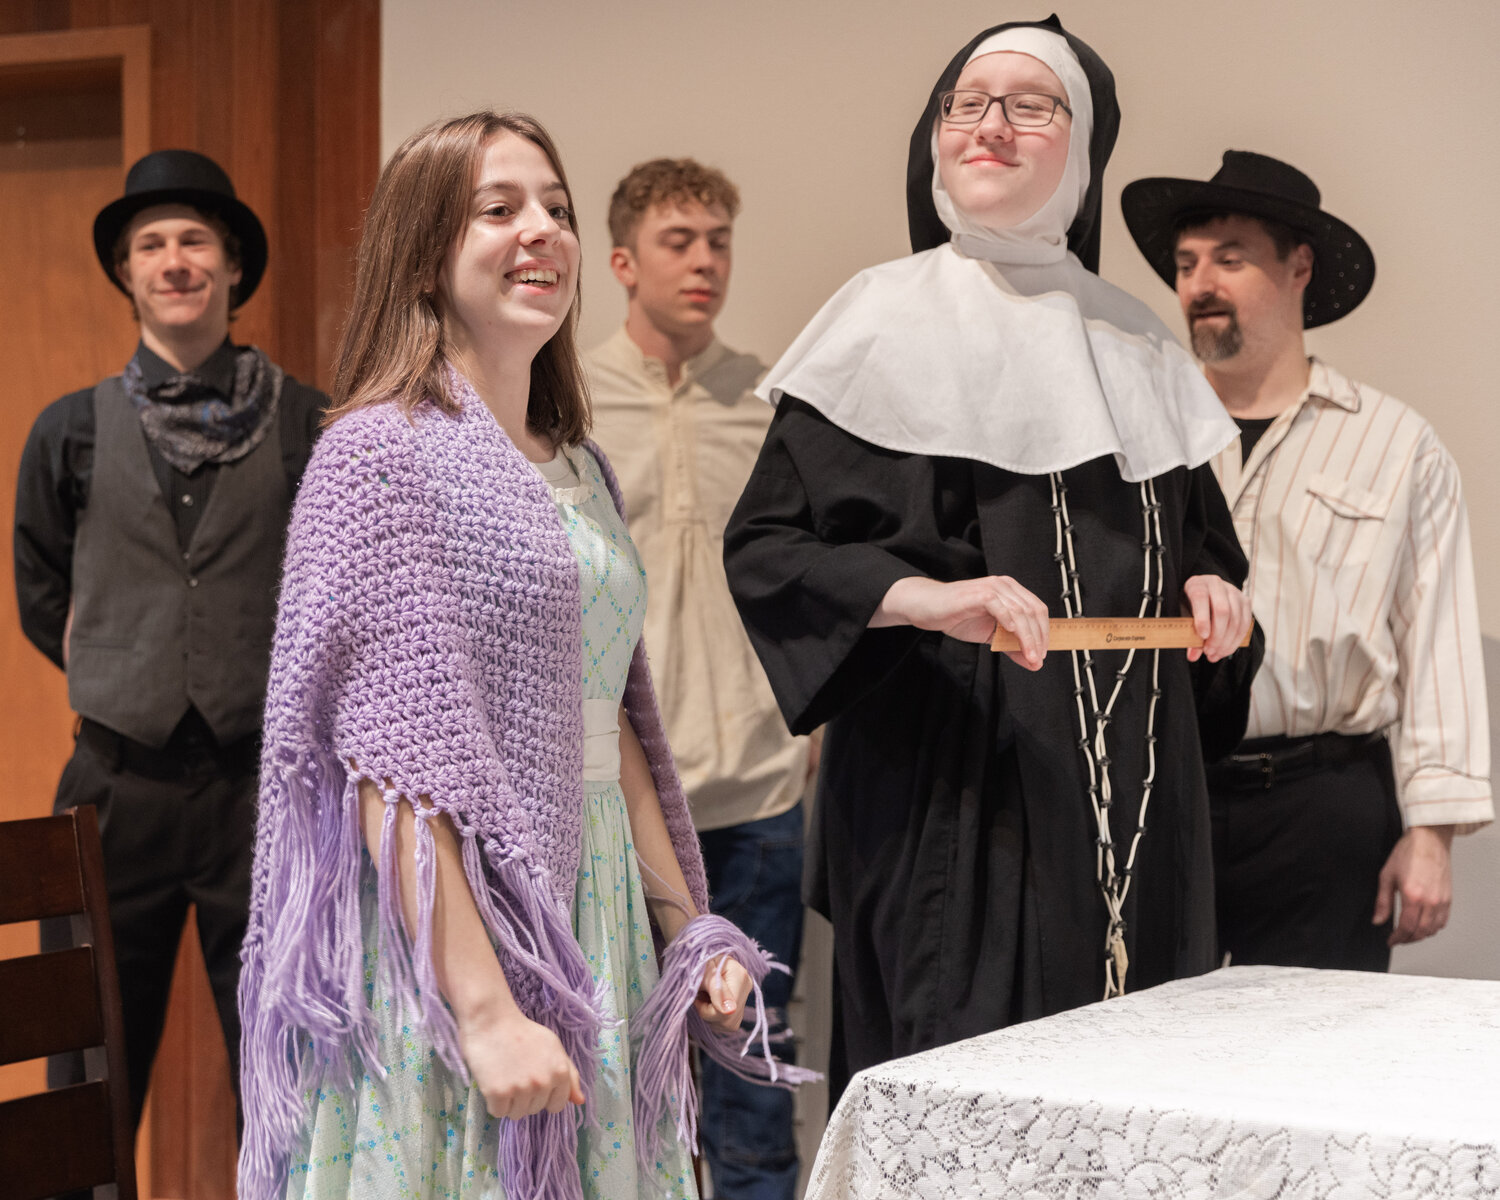 Elise Caserta as Hildegard Percifield, center left, smiles on stage during dress rehearsals for the Christmas at Rattlesnake Gulch play at Mountain View Baptist Church in Centralia.